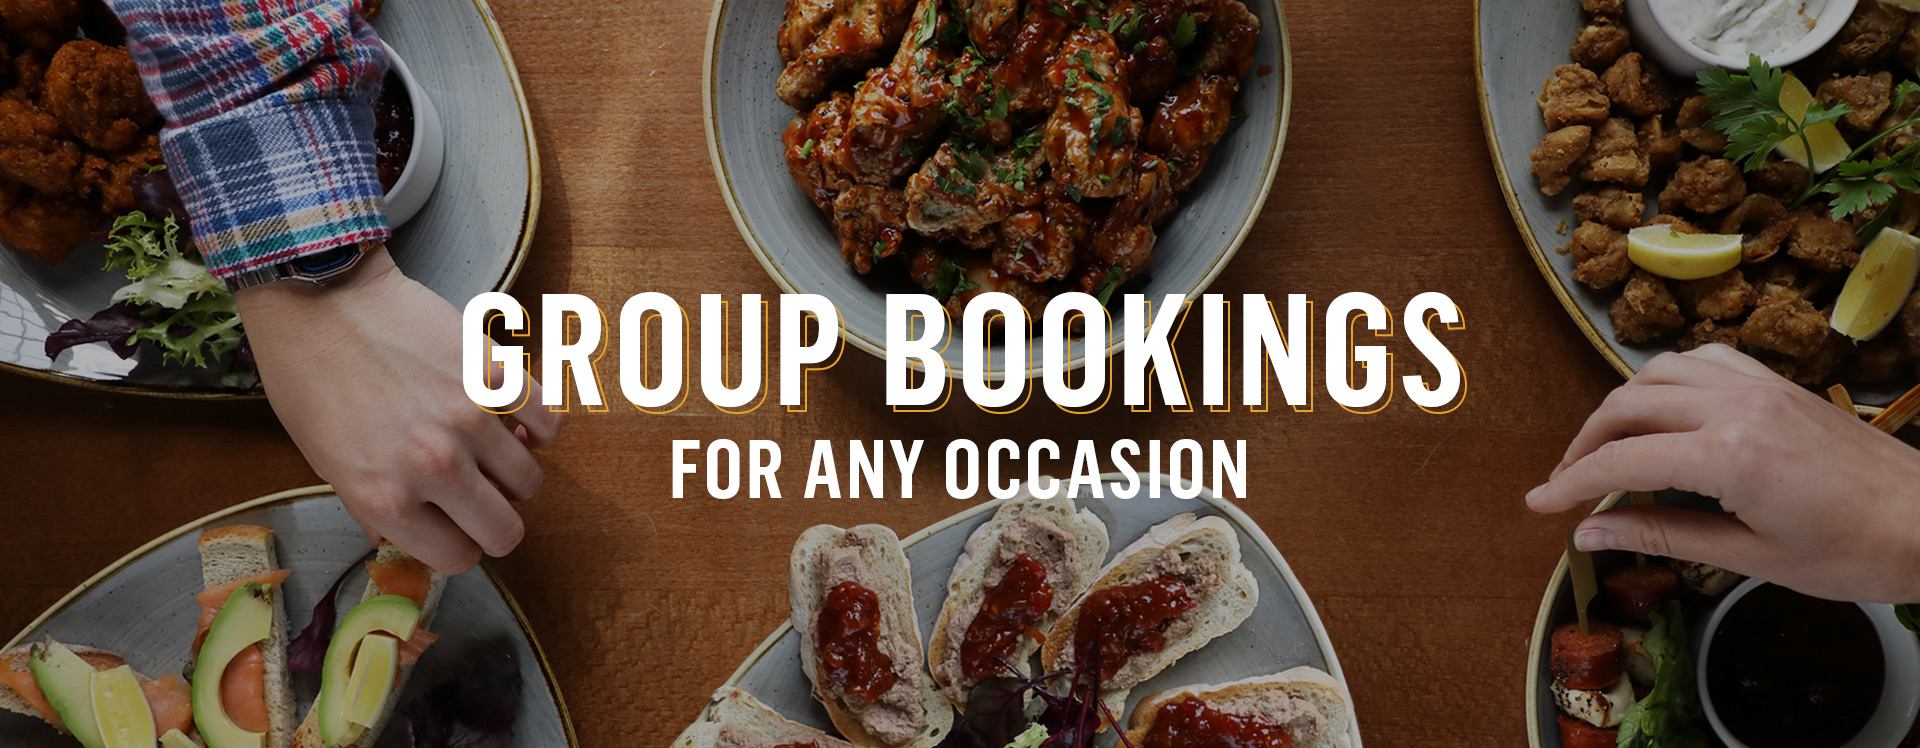 Group Bookings at The Swan